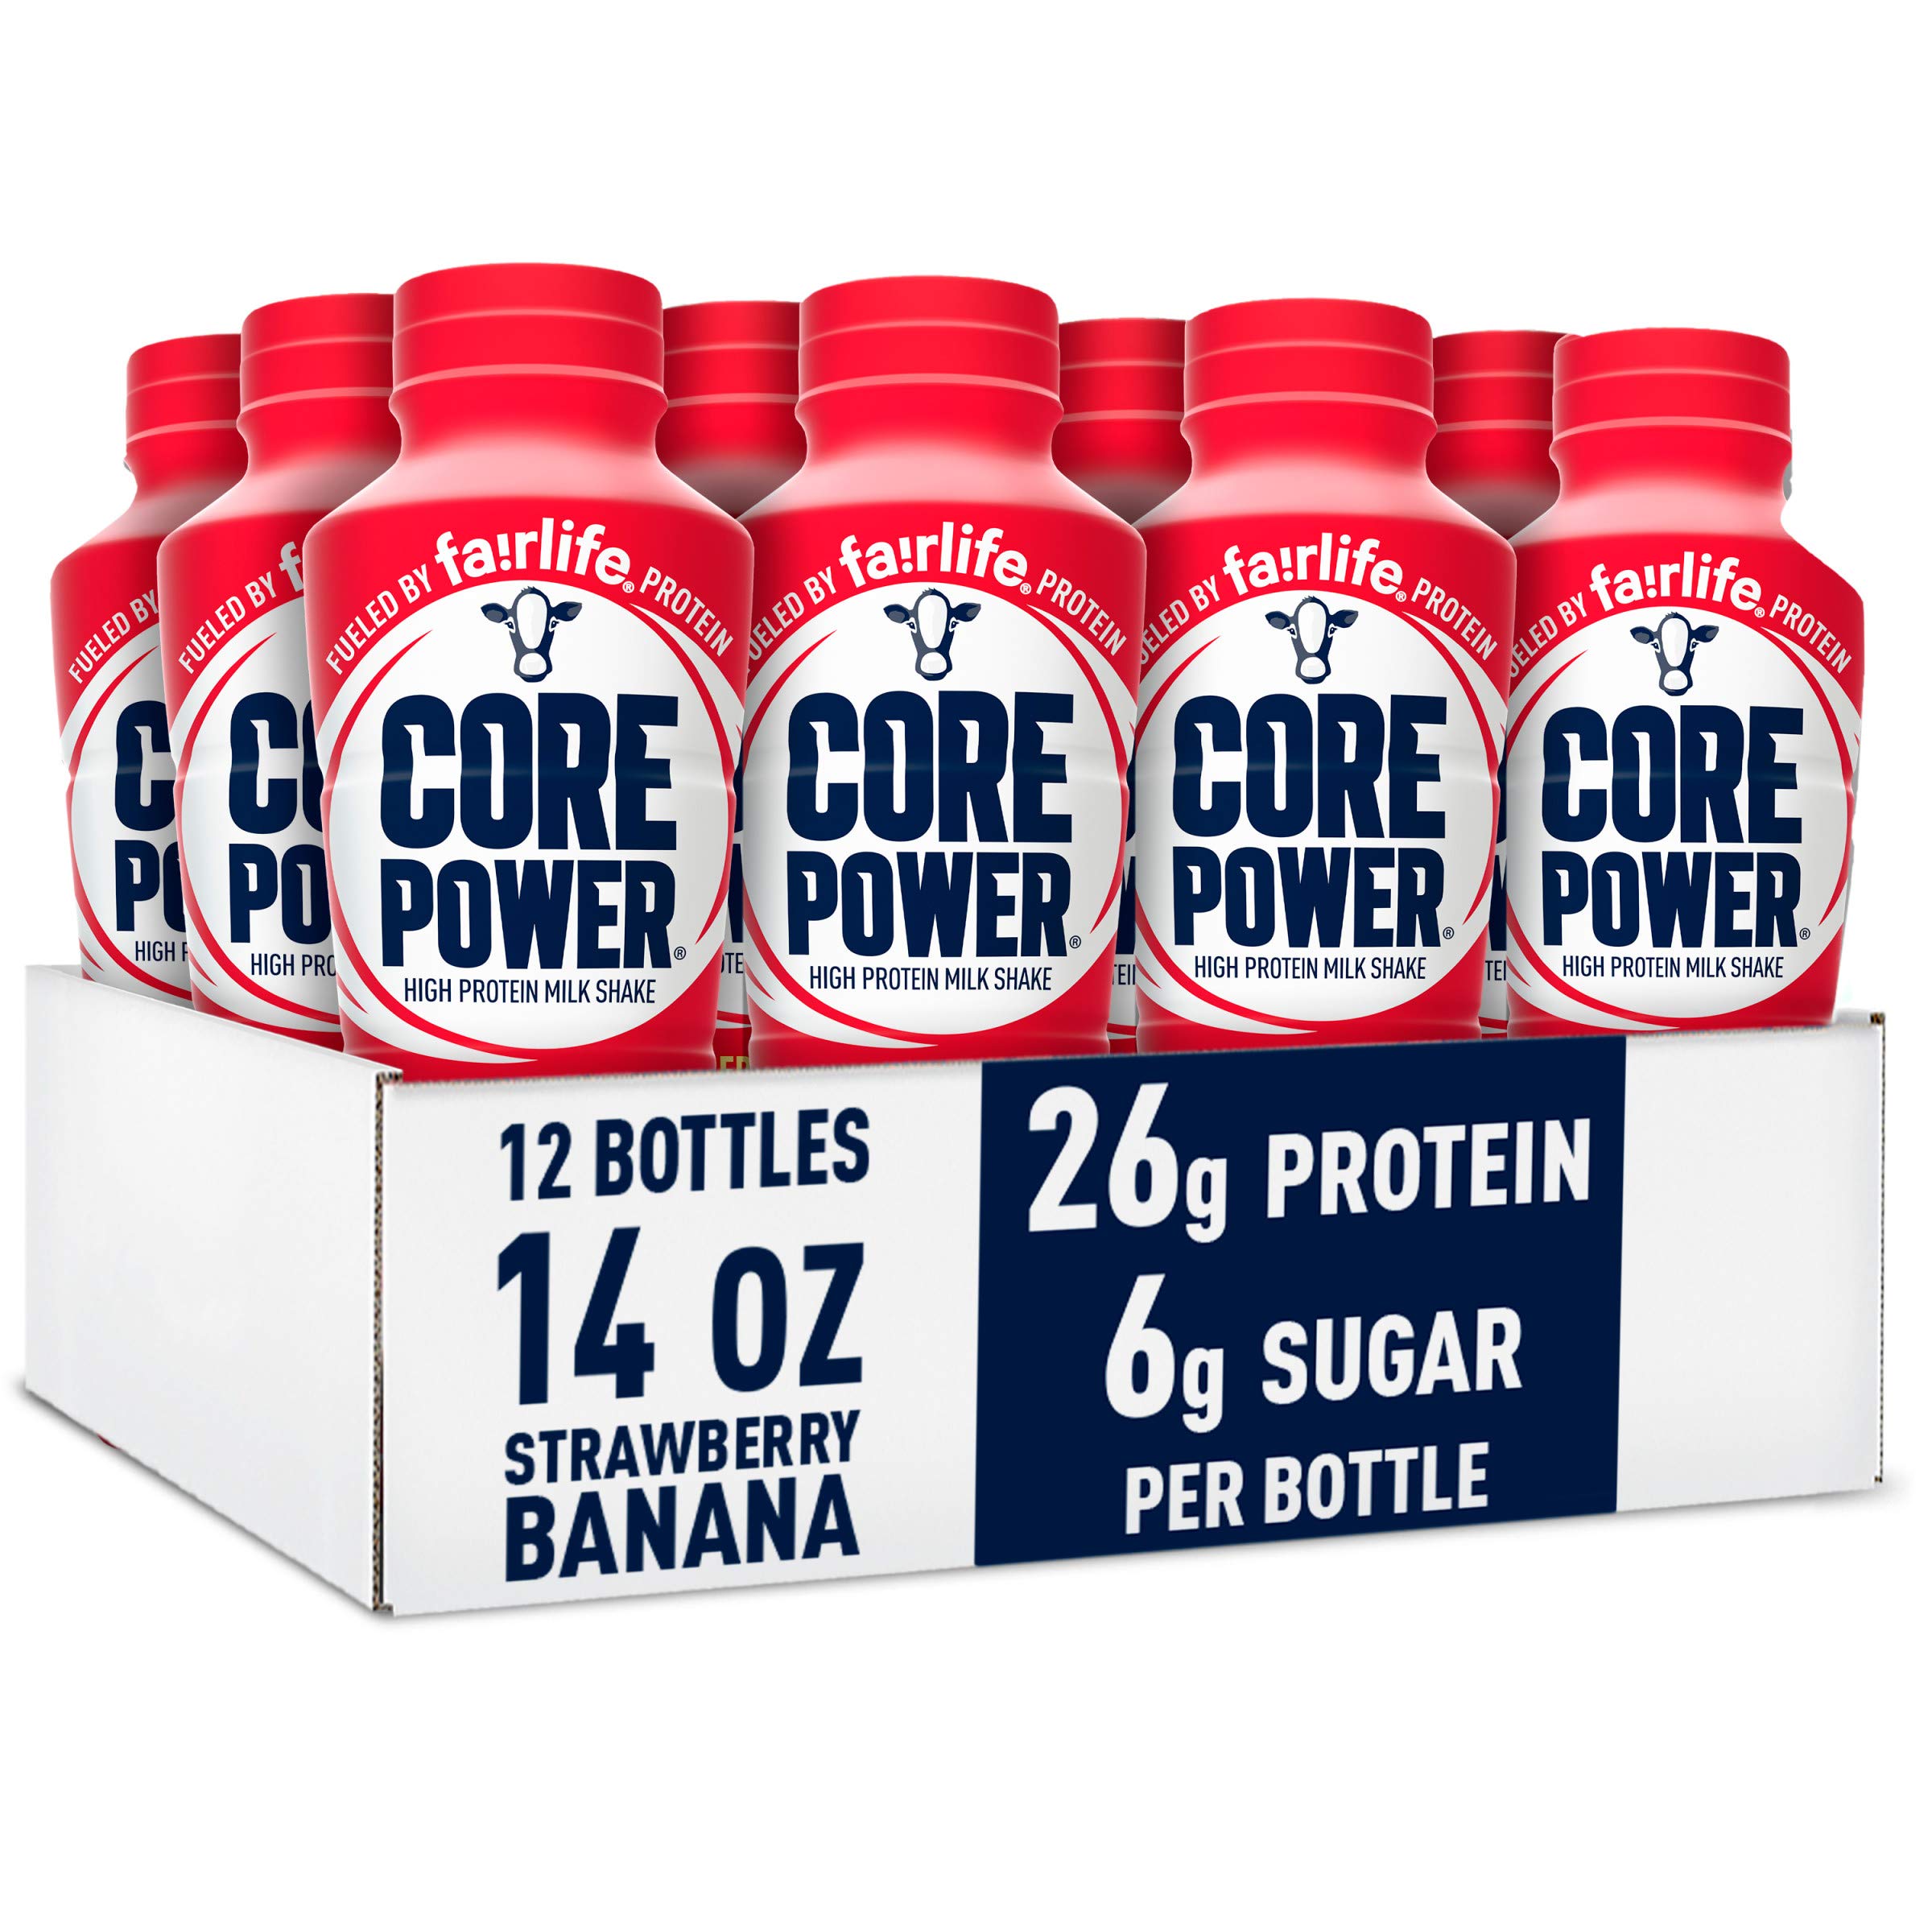 Fairlife Core Power 26g Protein Milk Shakes, Ready To Drink for Workout Recovery, Strawberry Banana, 14 Fl Oz (Pack of 12)